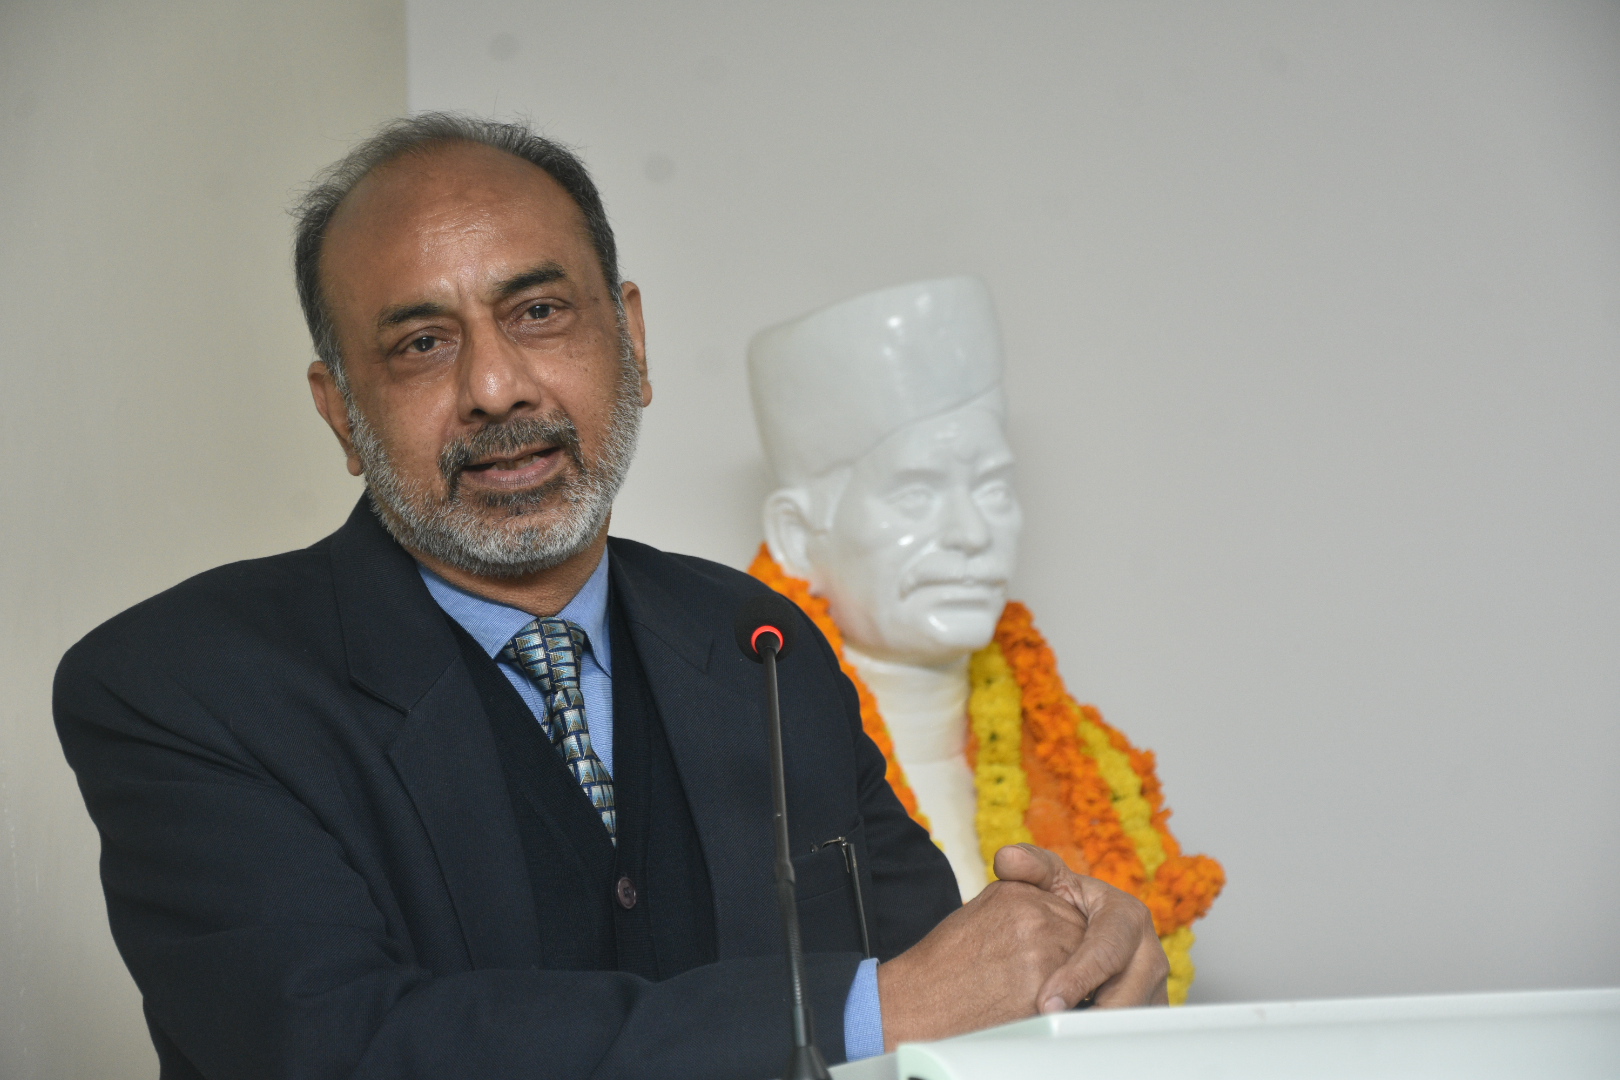 Remarks by: Prof. Prof. S B Agrawal, Professor Department of Botany, Institute of Science, Banaras Hindu University